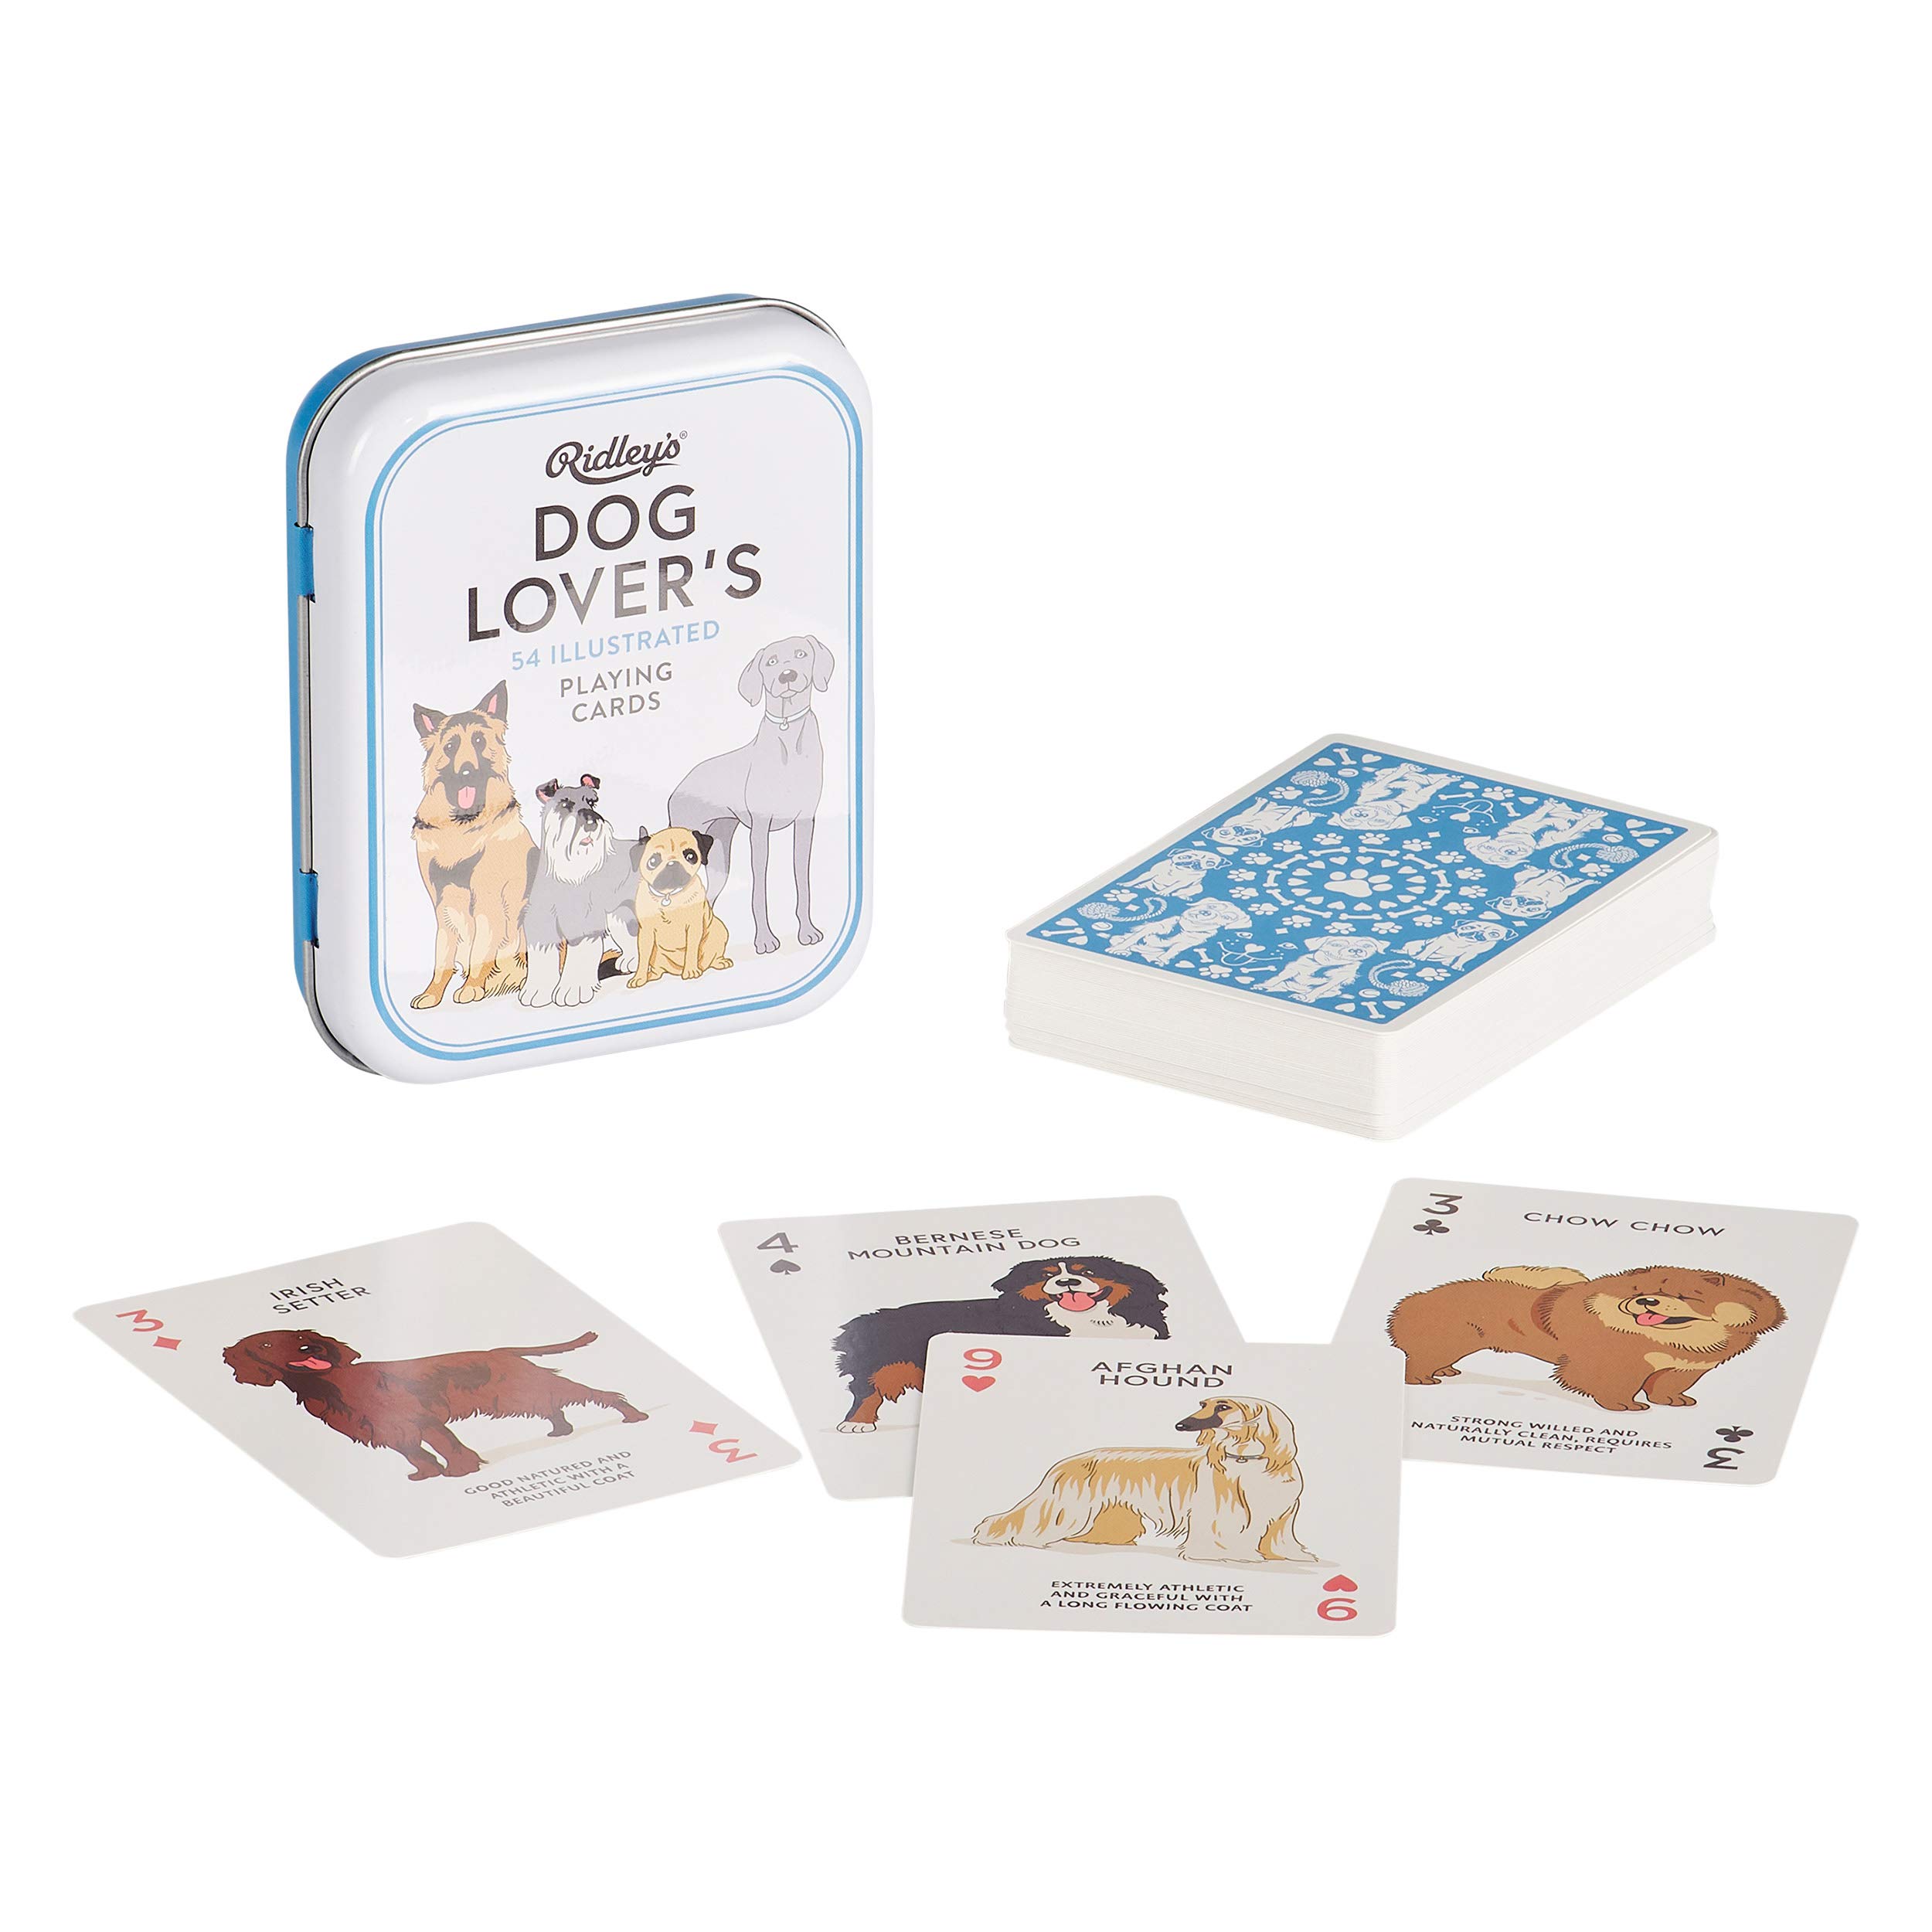 Ridley's Dog Lover’s Deck of Playing Cards – 54 Beautifully Hand-Illustrated Dog Playing Cards – Includes a Durable Storage Tin for Easy Travel – Makes a Unique Gift Idea